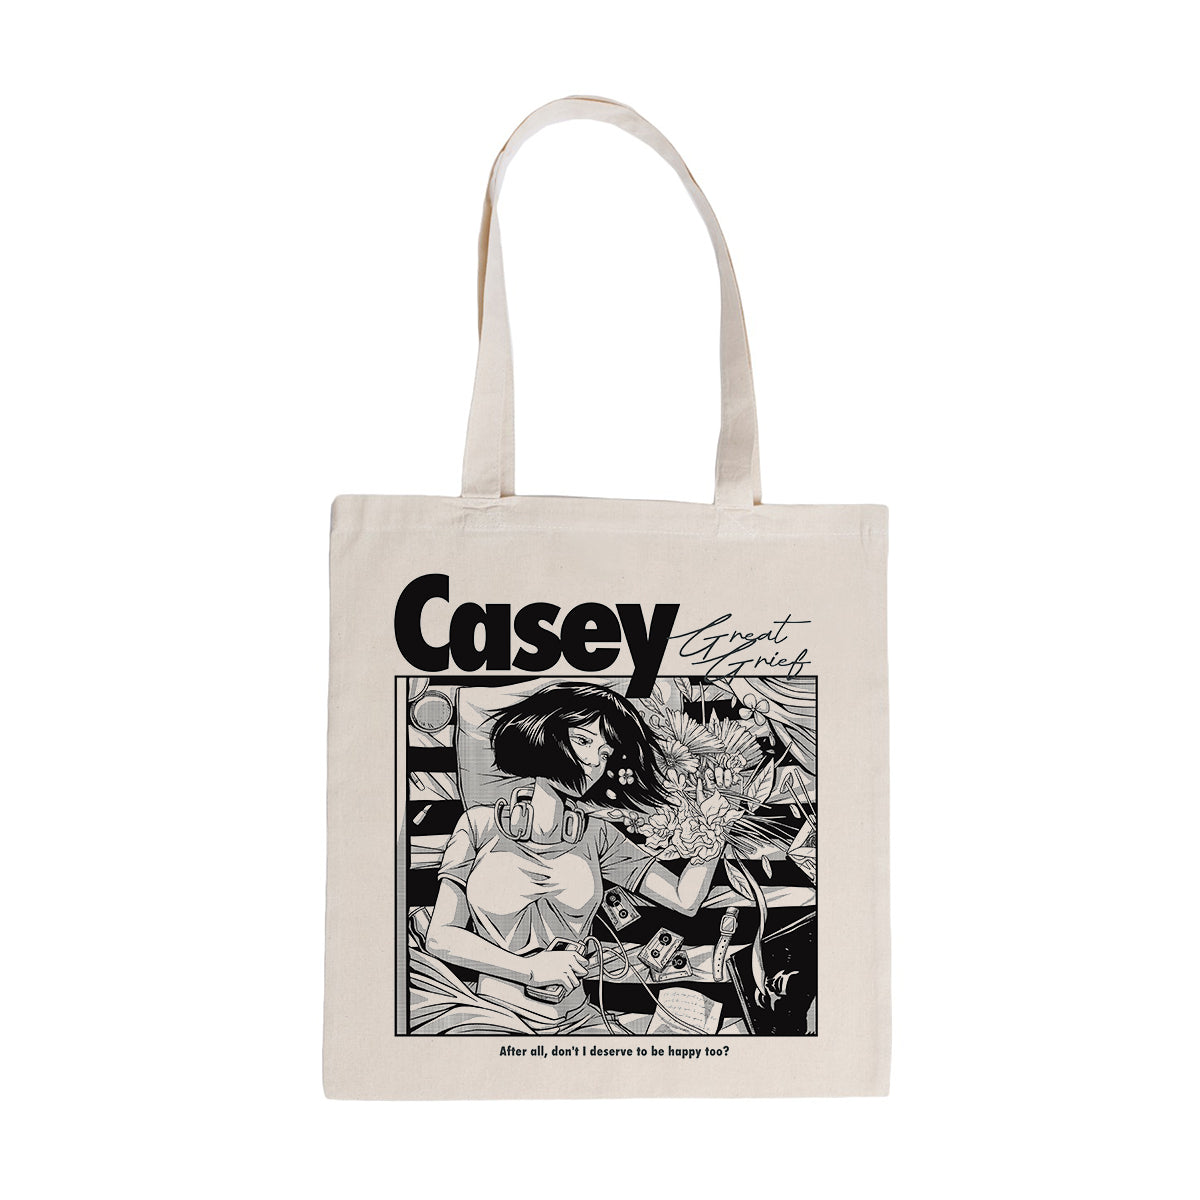 CASEY "Great Grief Anime" Tote Bag